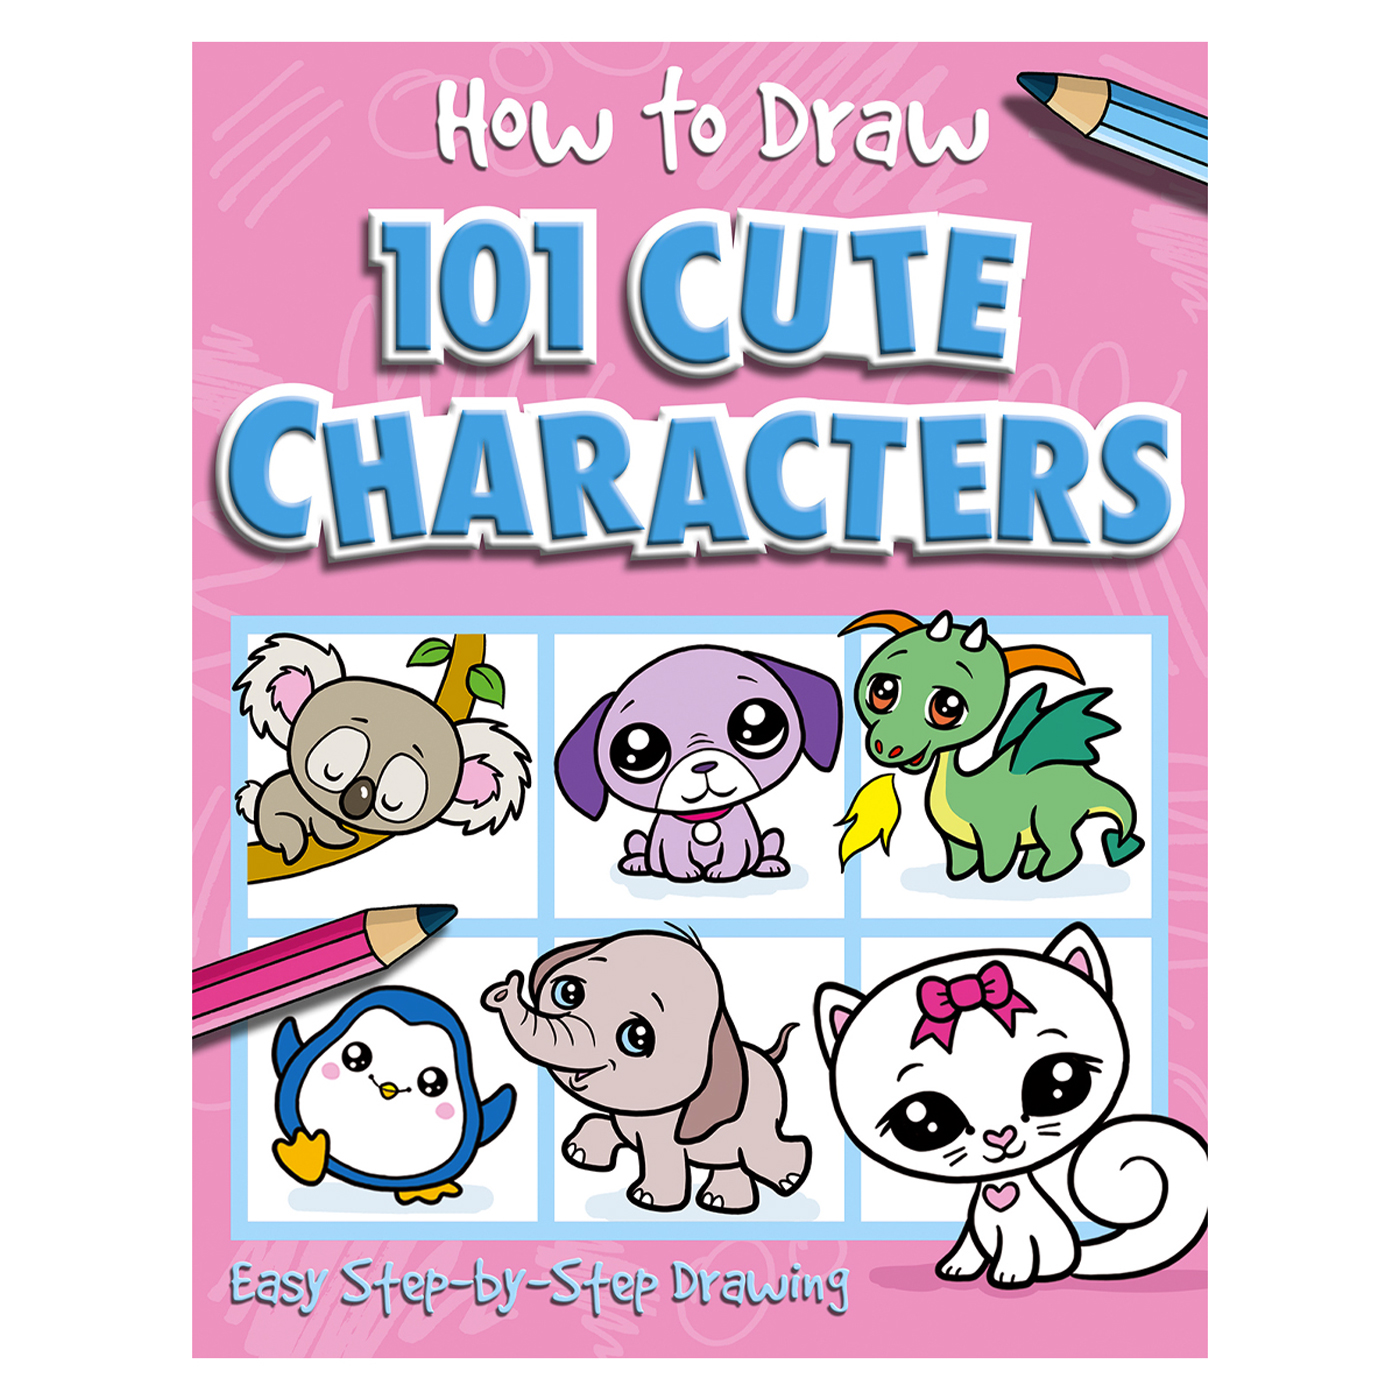  How To Draw 101 Cute Characters